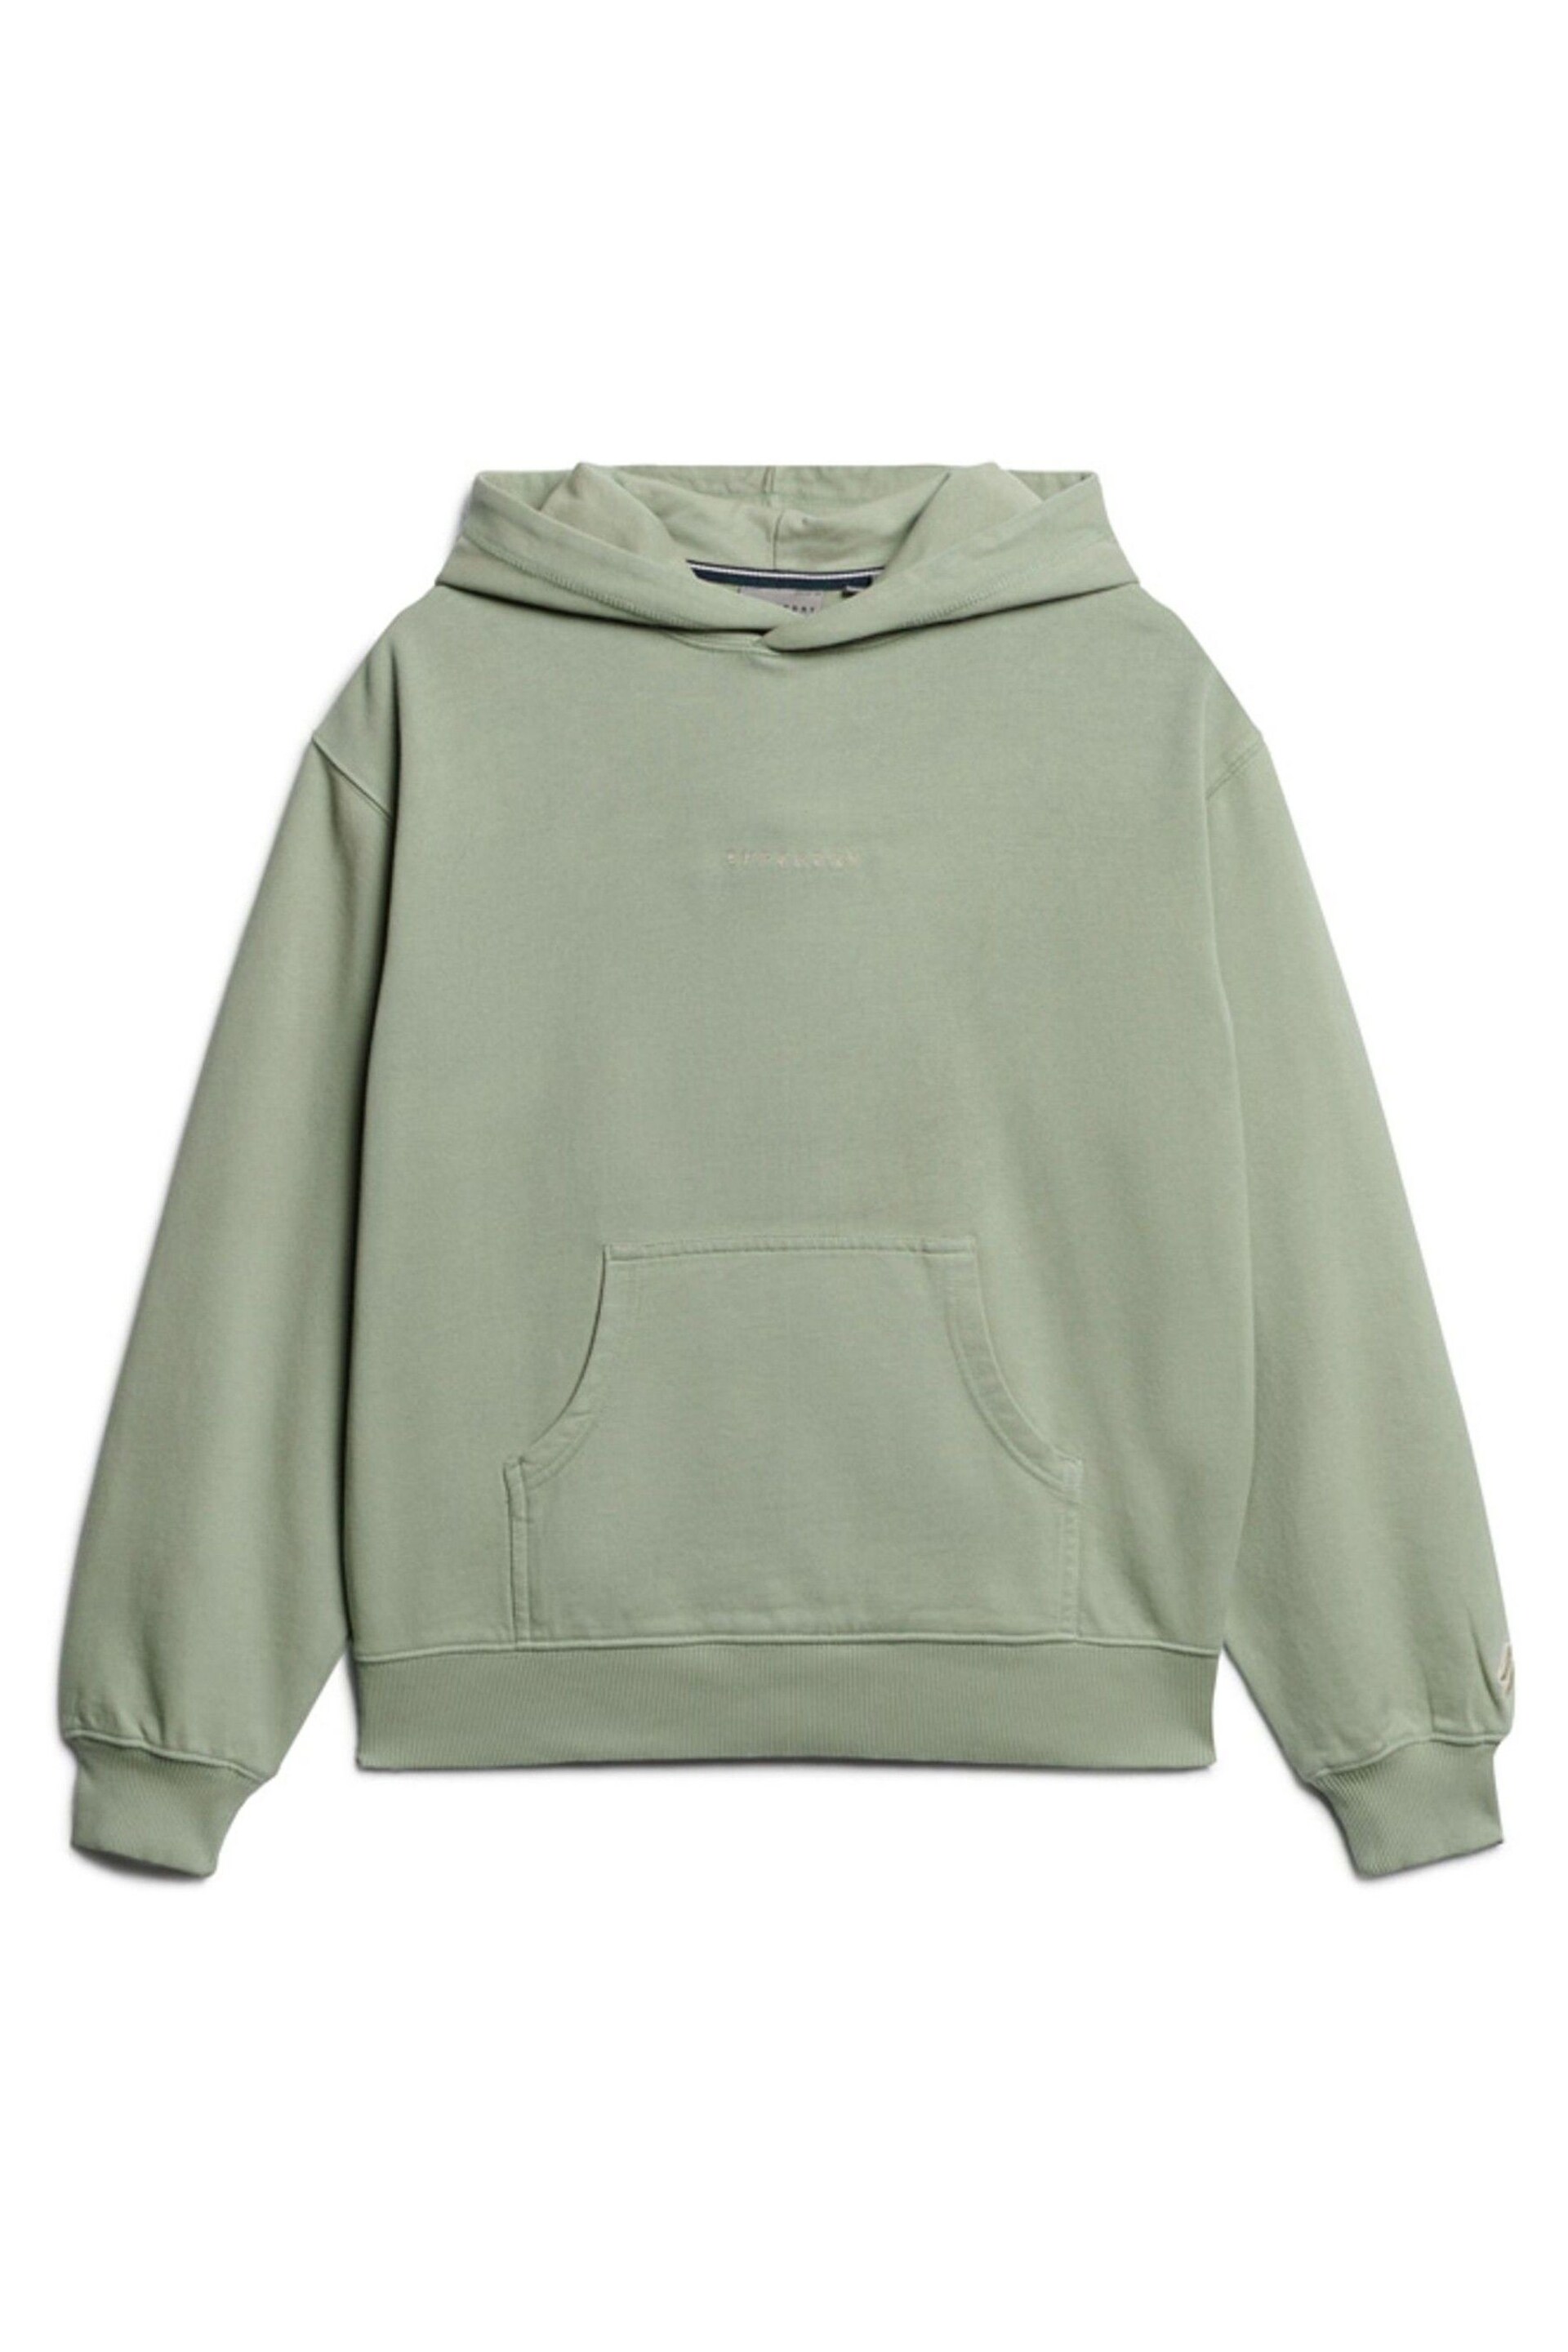 Superdry Green Micro Logo Embroided Loose Hoodie - Image 4 of 6